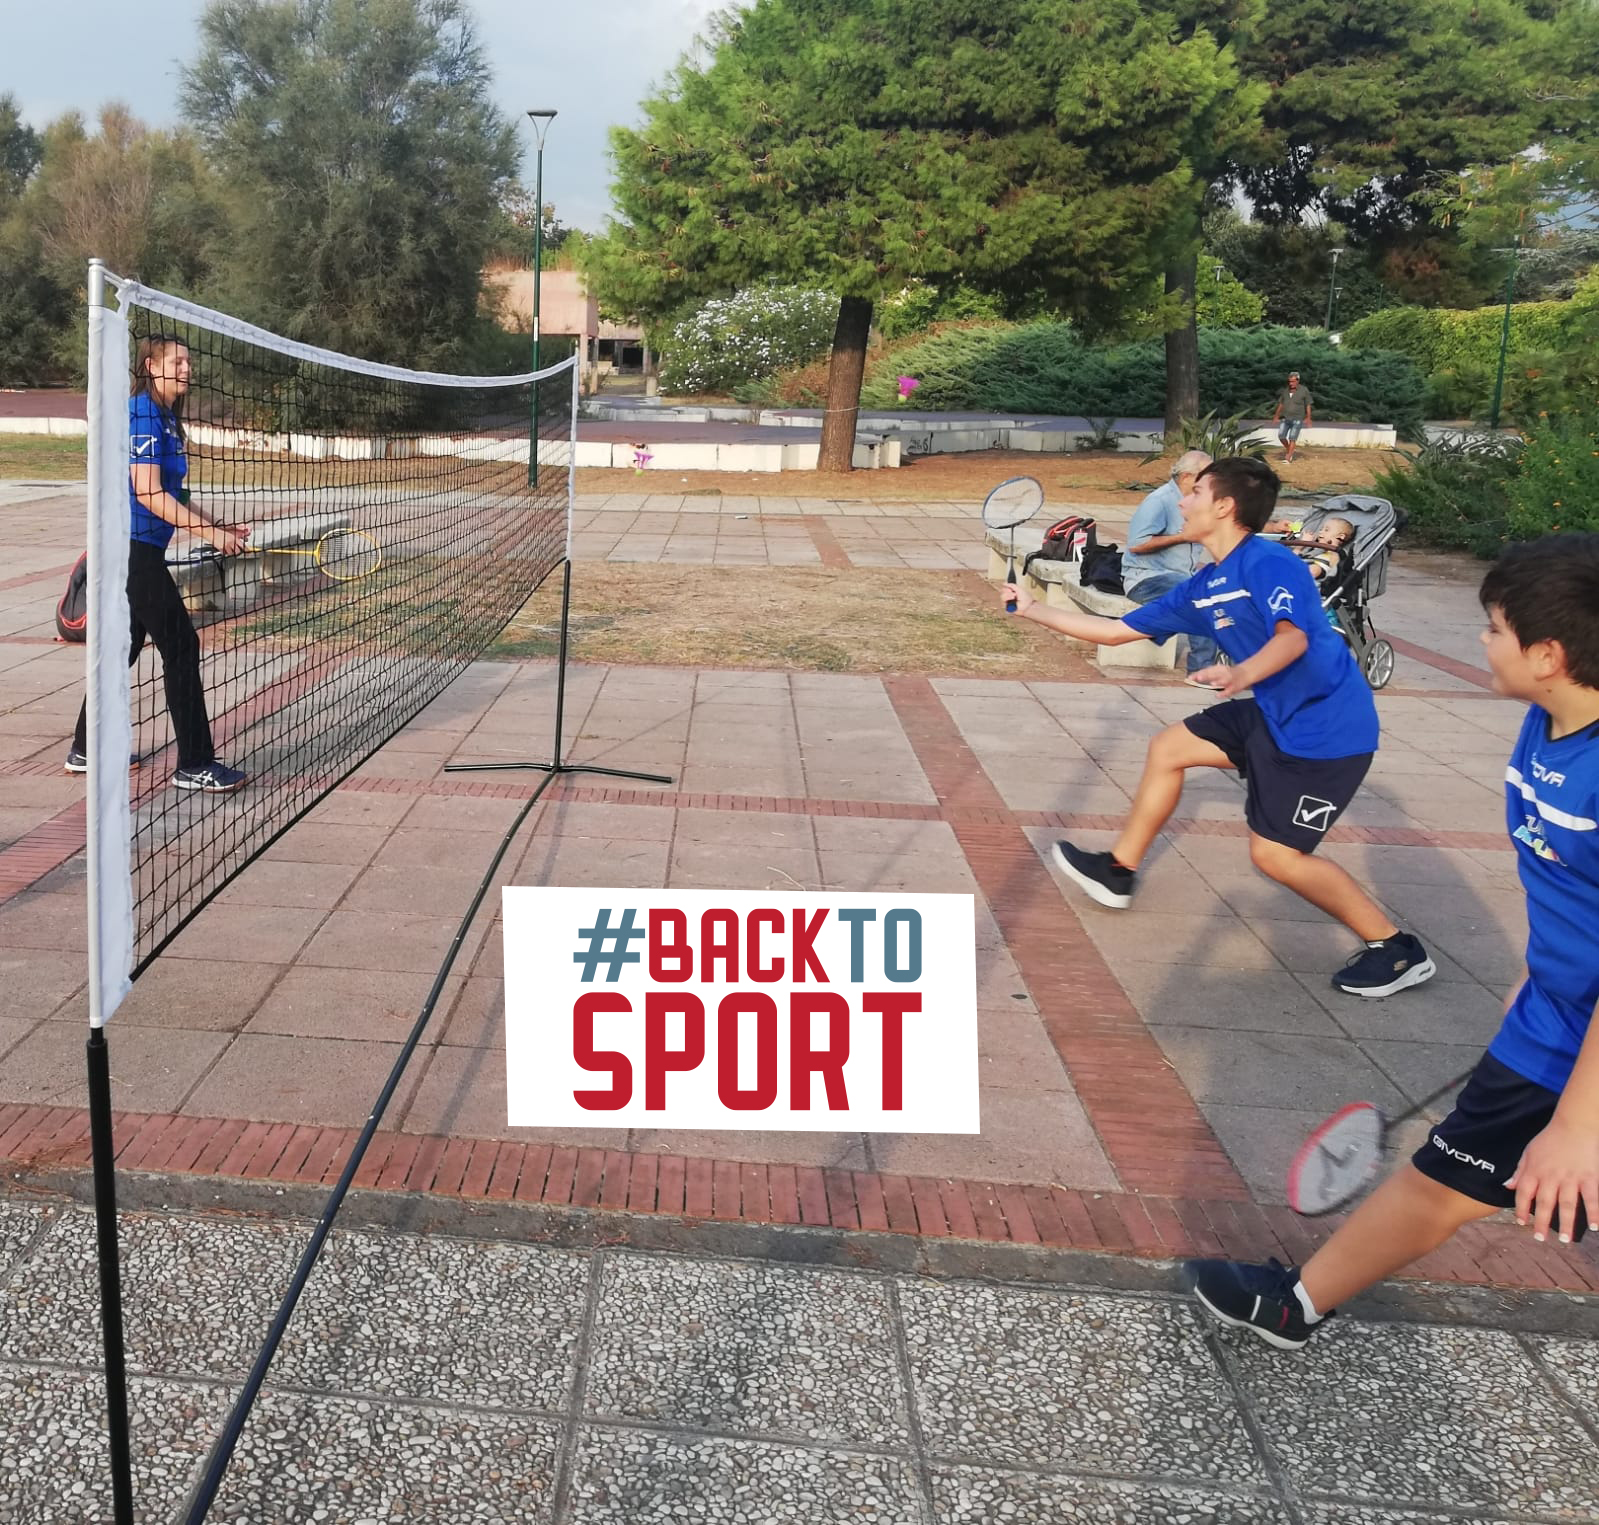 Back To Sport 2020-Sport Senza Frontiere